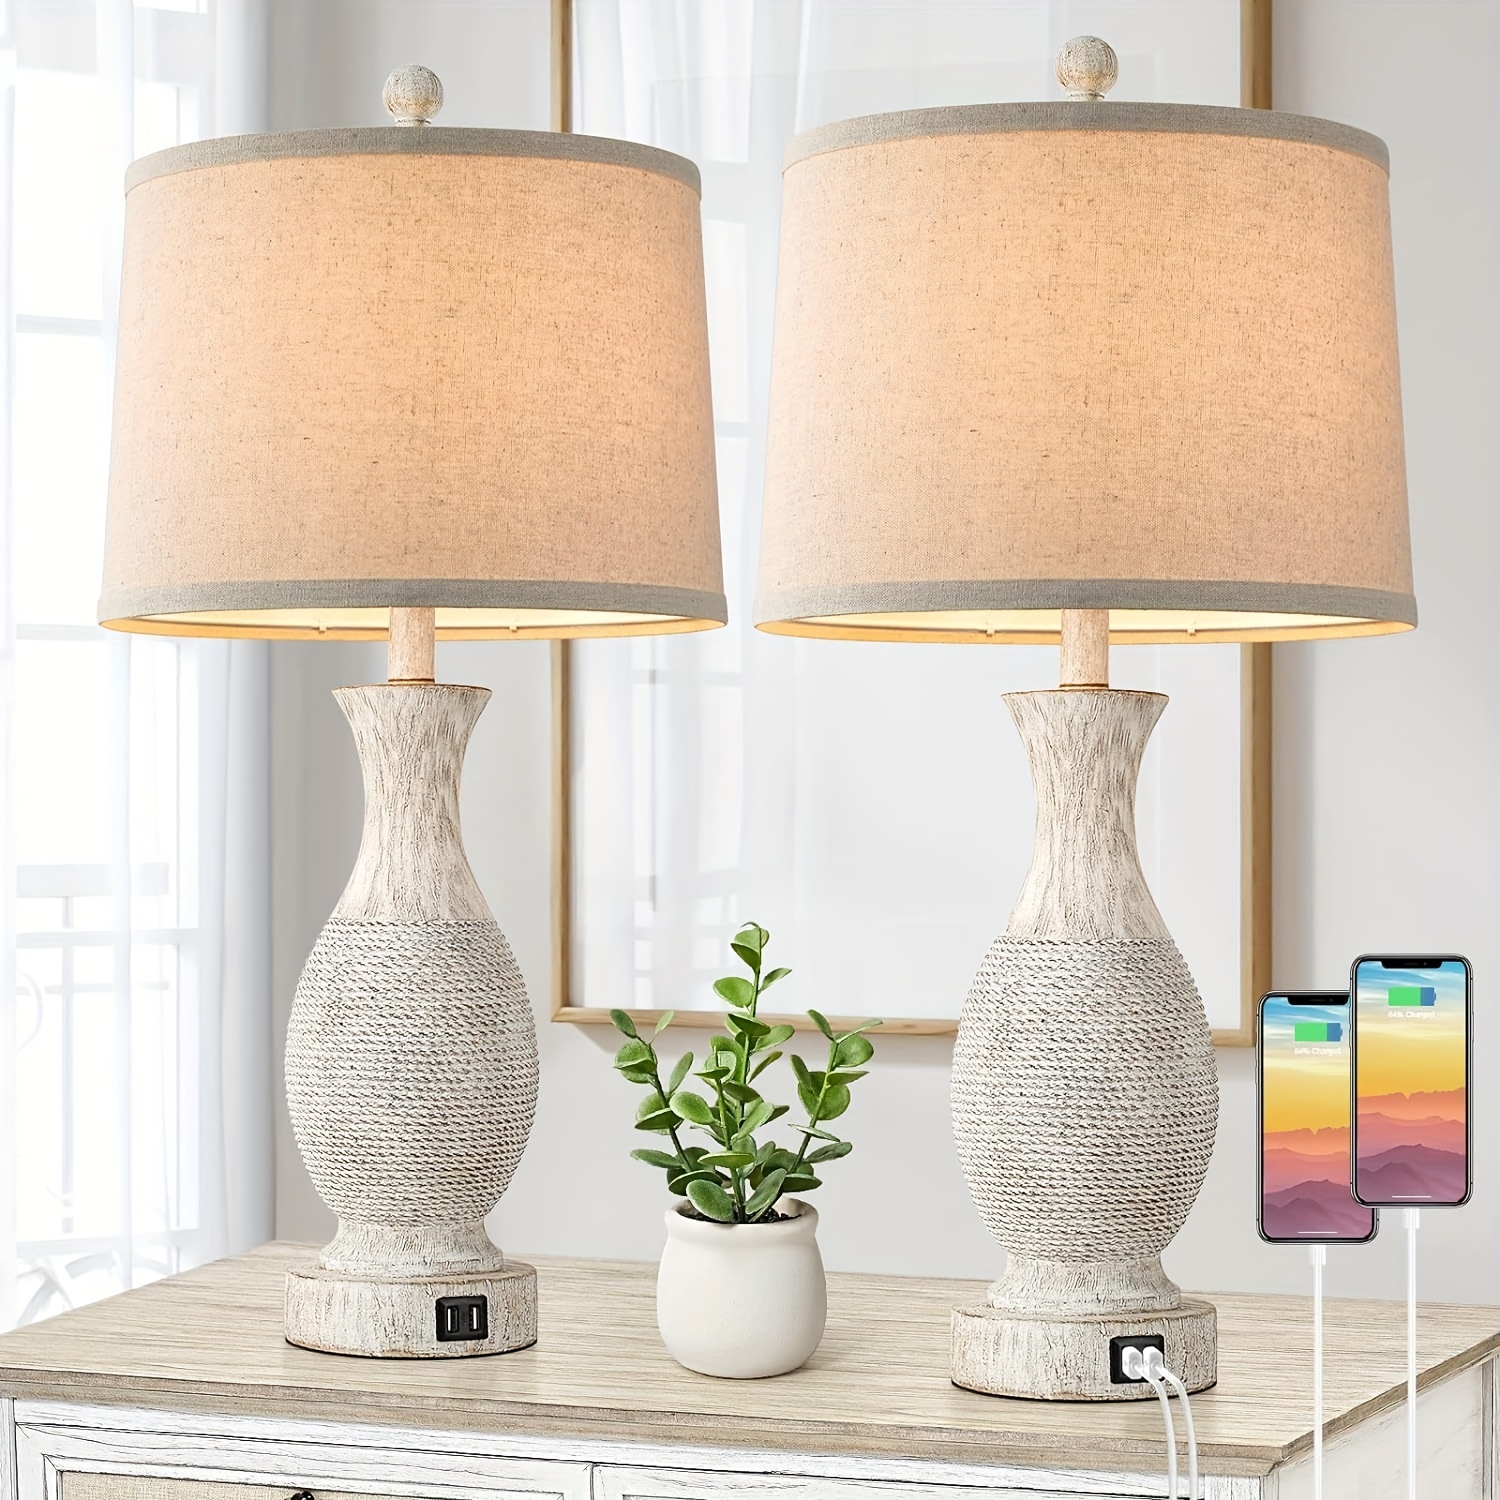 

Table Lamps Set Of 2-26" Tall Table Lamps With Usb Charging Ports, Farmhouse Bedroom Lamps With Rotary Switch & E26 Base, Bedside Nightstand Lamps With Fabric Shade For Living Room Office Bedroom